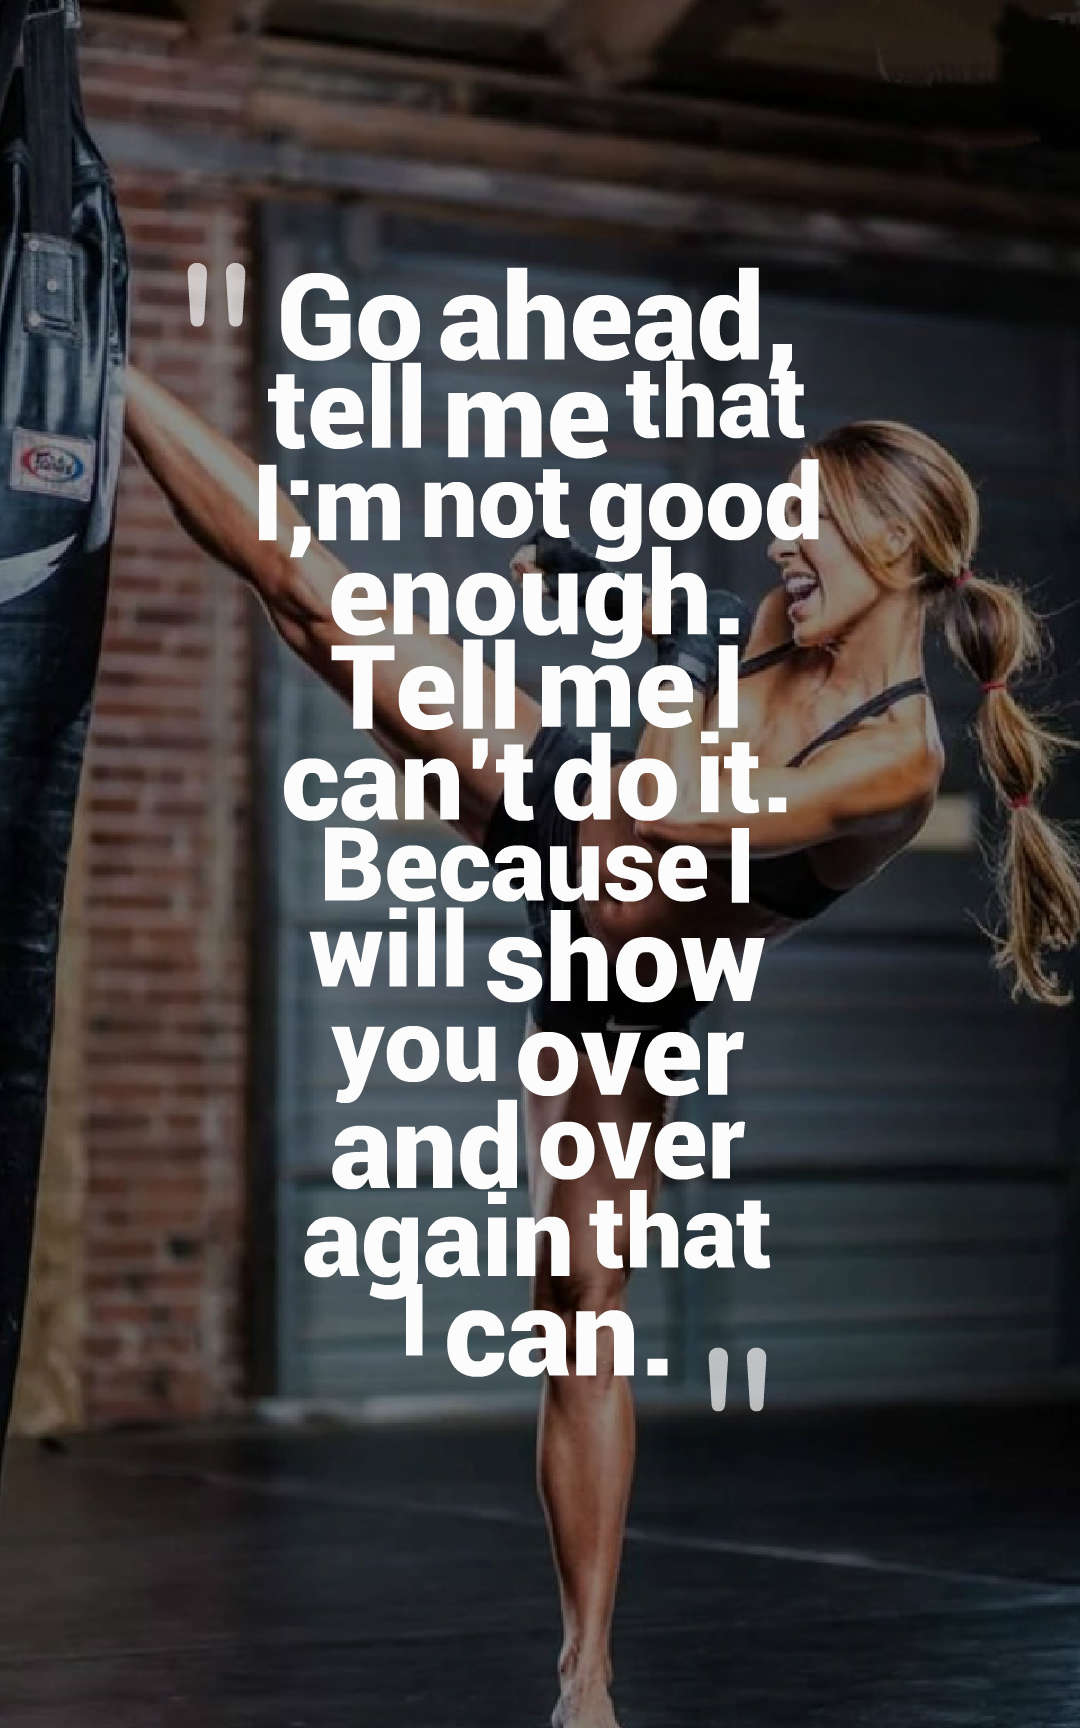 Go ahead, tell me that I;m not good enough. Tell me I can’t do it. Because I will show you over and over again that I can.